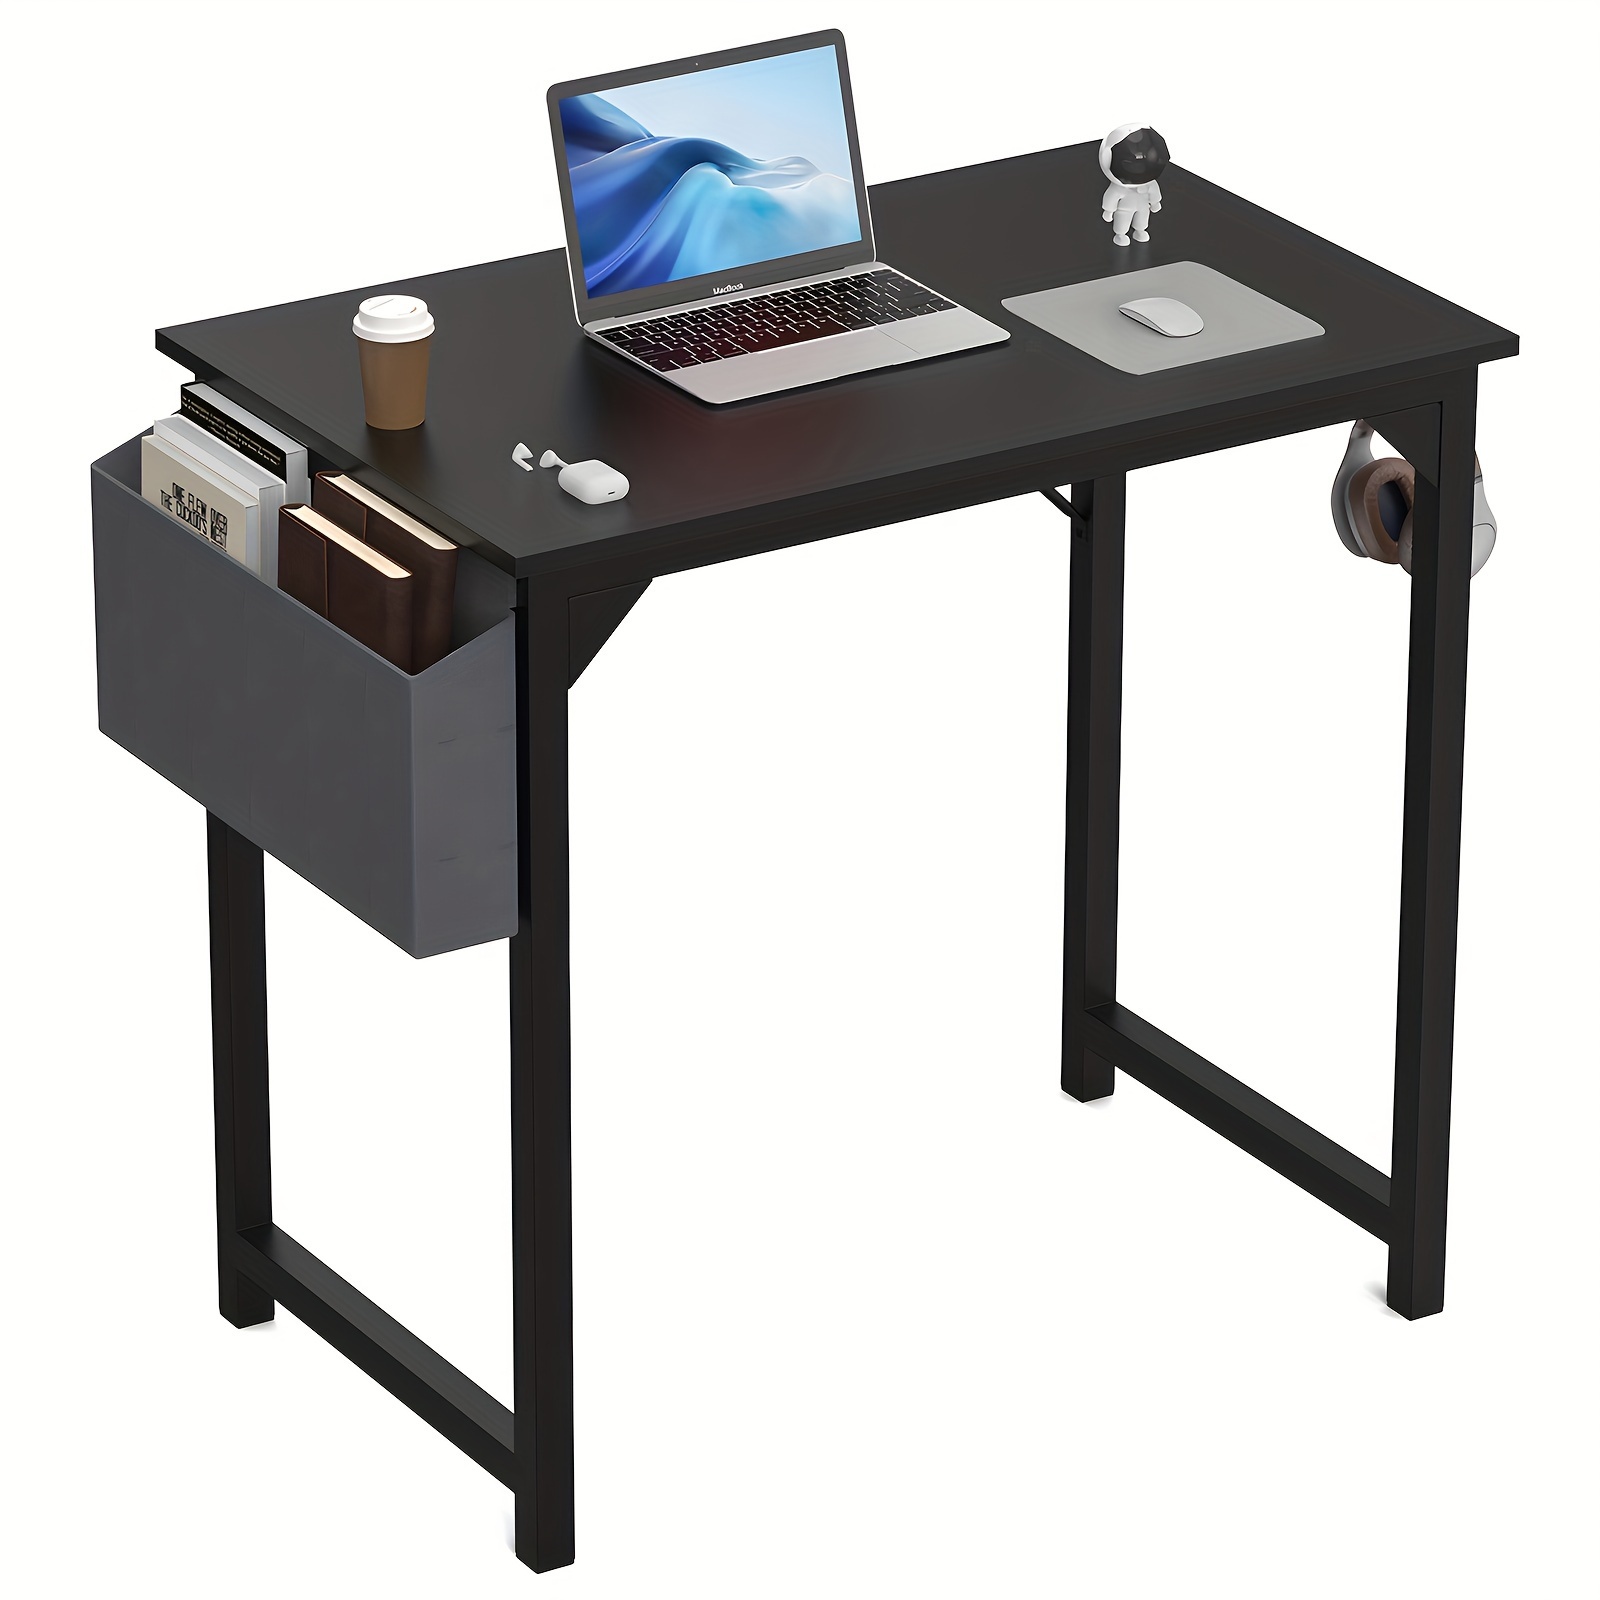 

1pc Computer Desk For Small Spaces With Storage Bag, Home Office Work Desk With Headphone Hook, Small Office Desk Study Writing Table